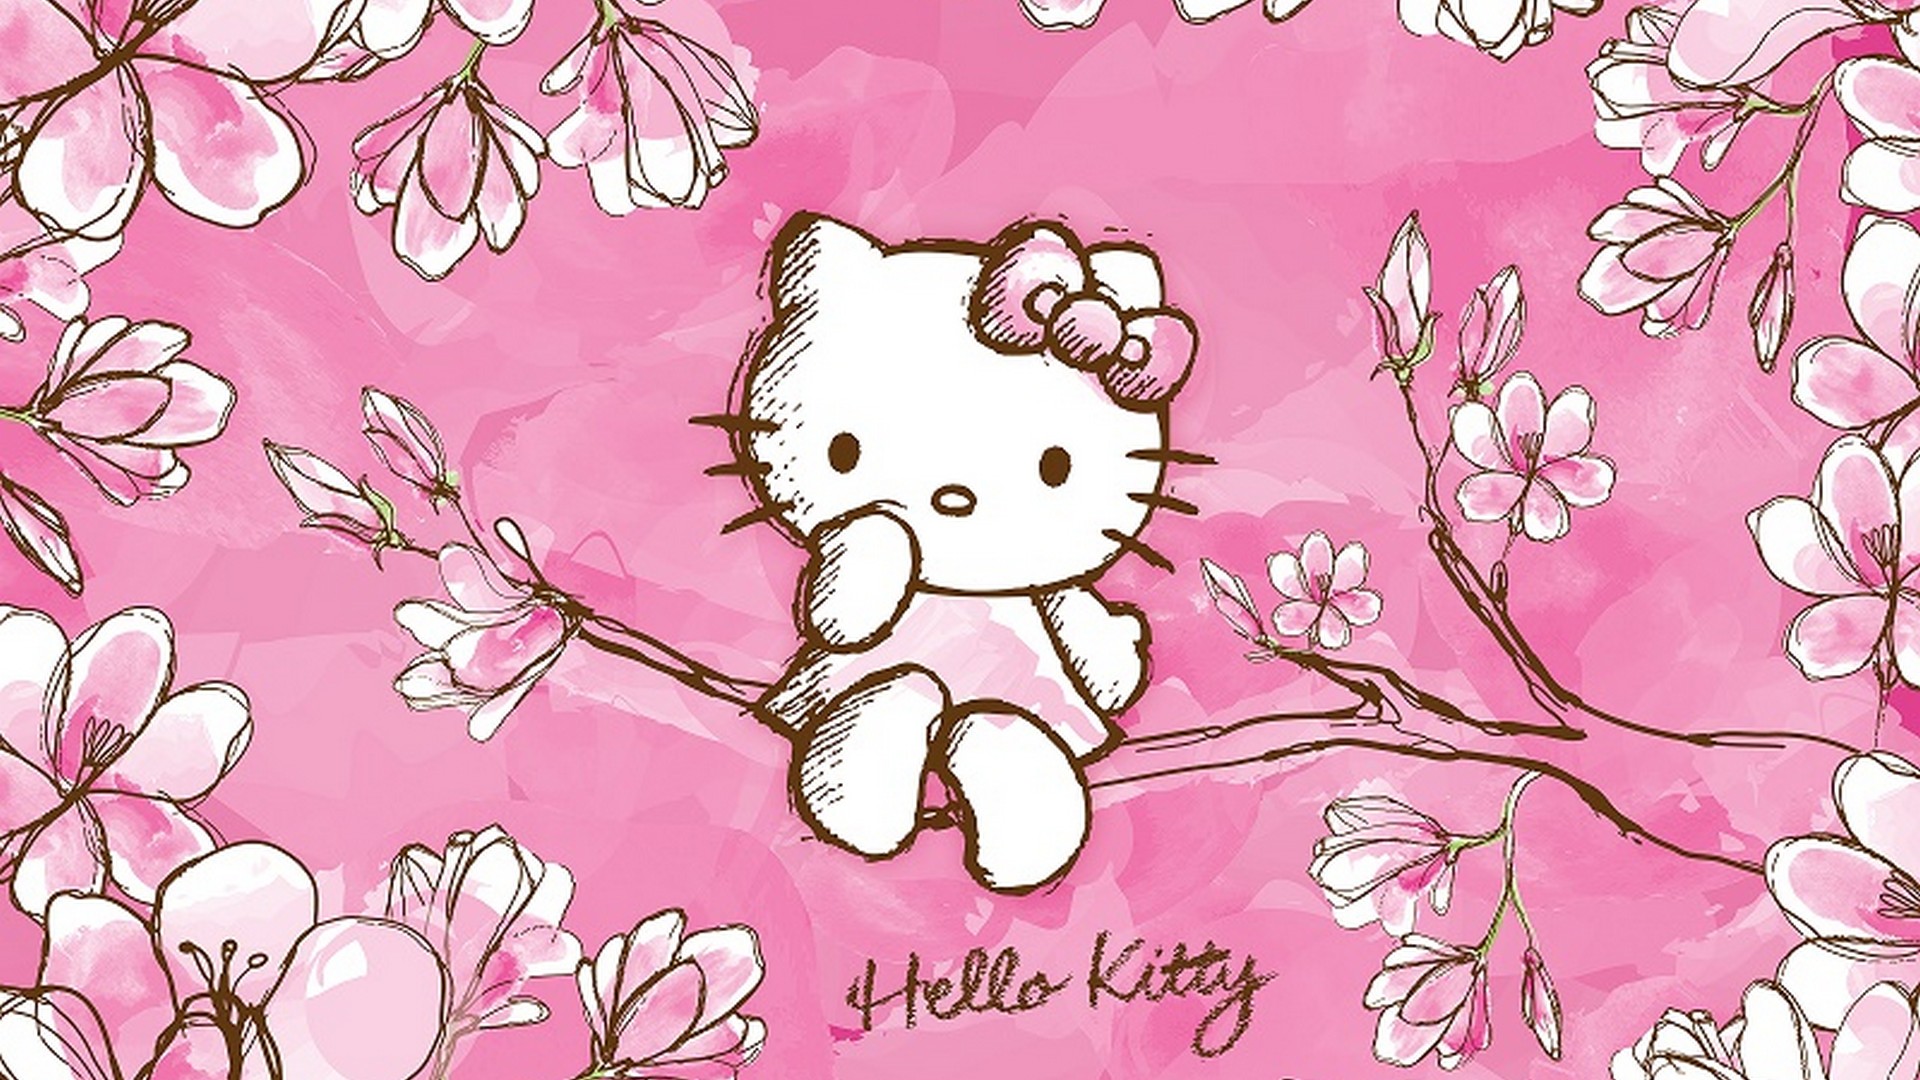 Wallpaper Hello Kitty Pictures 2021 Cute Wallpapers Get free computer wallpapers of hello kitty. wallpaper hello kitty pictures 2021